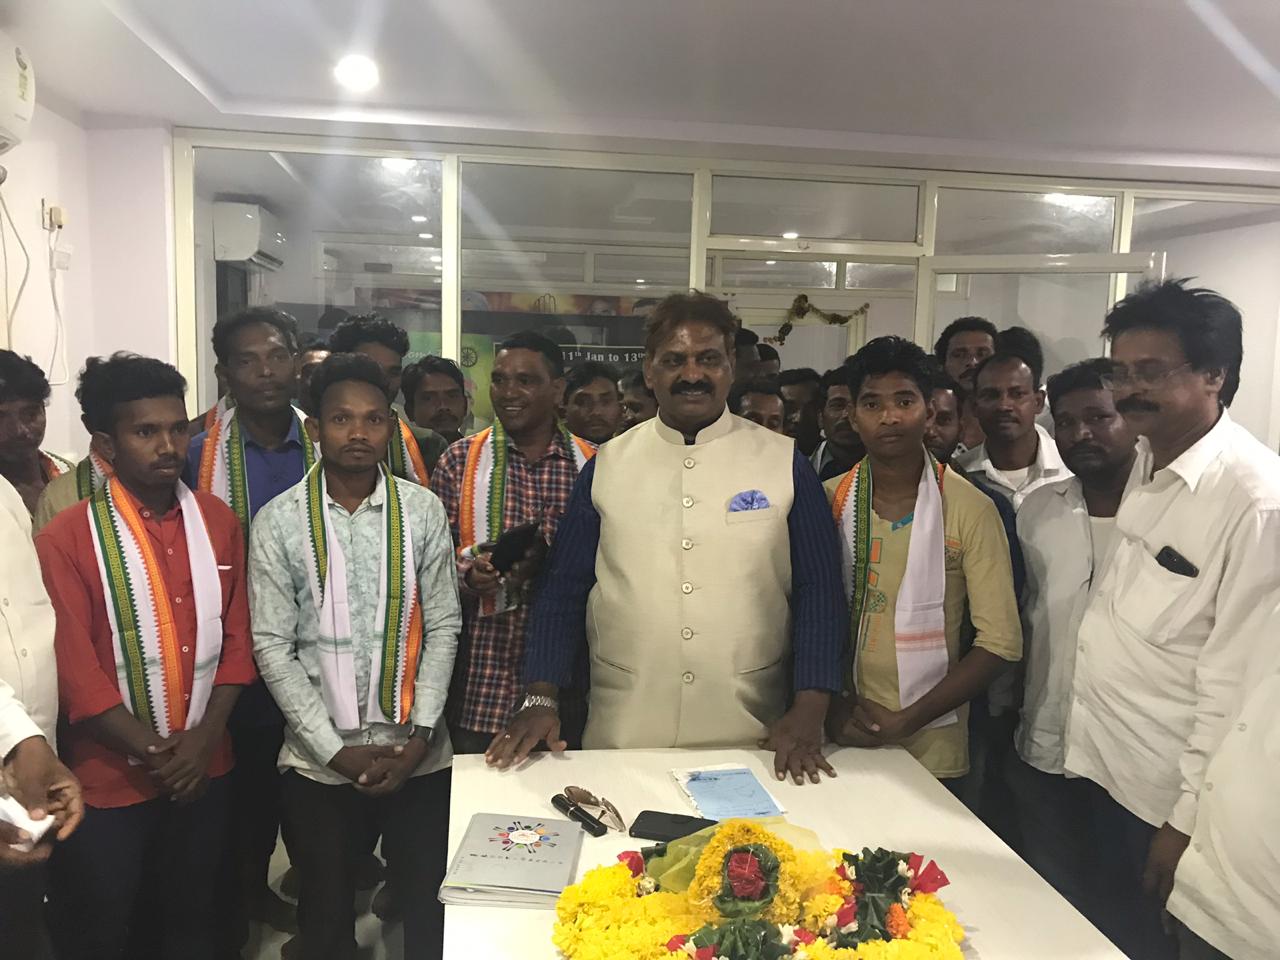 Grand gestures by the candidates of BJD and Congress to Dr Tirupati Panigrahi